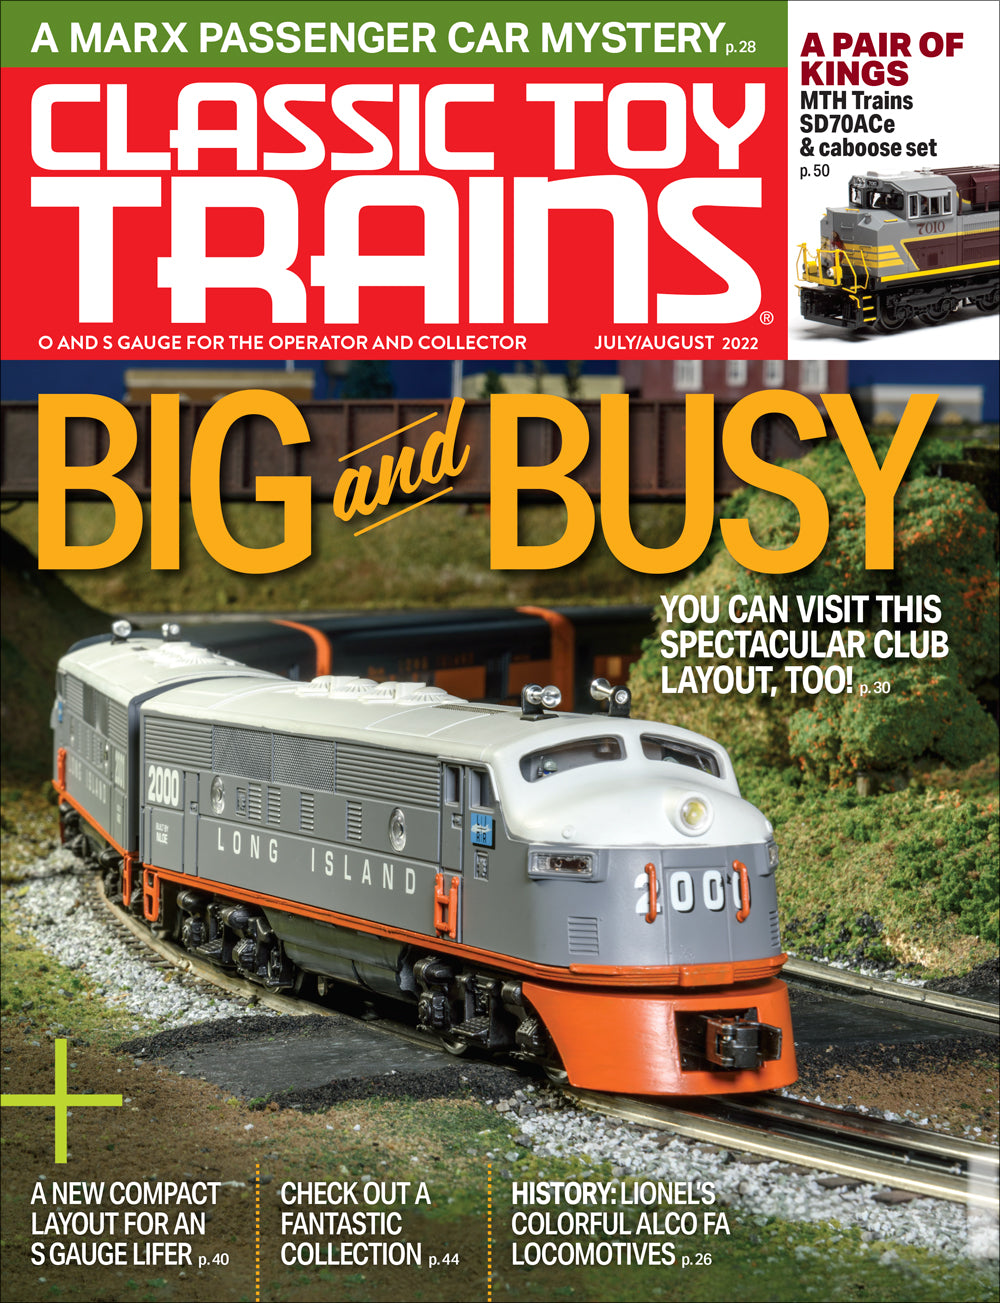 Classic Toy Trains - Magazine - Vol.35 - Issue 04 - July/August 2022